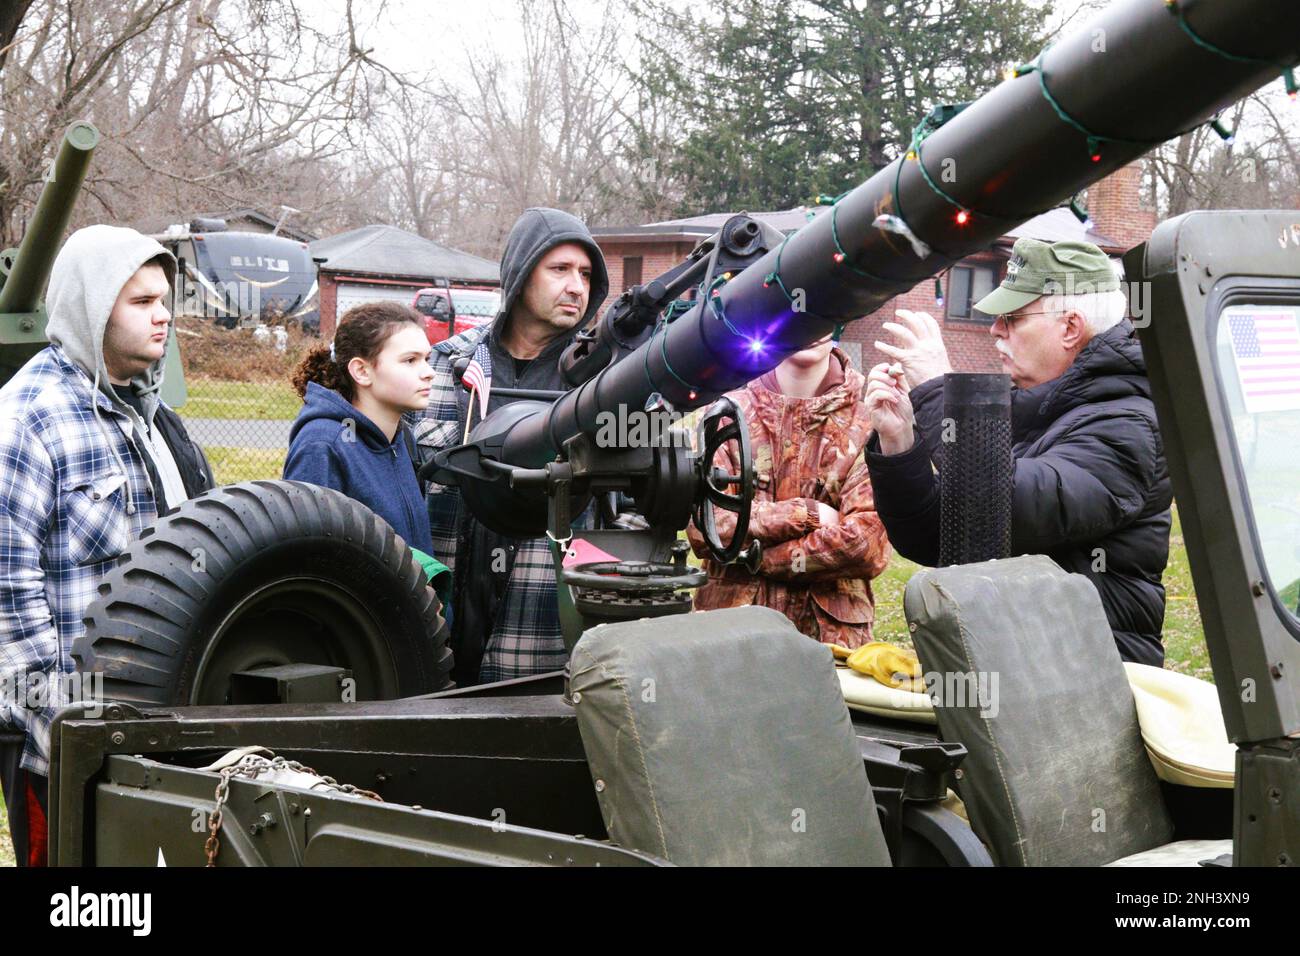 Illinois State Military Museum volunteer John Kennedy of Springfield, Ill., explains to Bill Farnum of Farmer City, Ill., and his family how a 106mm Recoilless Rifle used a 50-caliber single-shot rifle with illumination rounds to aim. The 106 was mounted on a M38A1 Jeep and was used by the U.S. Army during the Korean War. Kennedy volunteered to assist the Illinois State Military Museum during its Dec. 10 Christmas at the Front event at the museum in Springfield. The Illinois State Military Museum's mission is to preserve and exhibit the military heritage of the Illinois National Guard. Stock Photo